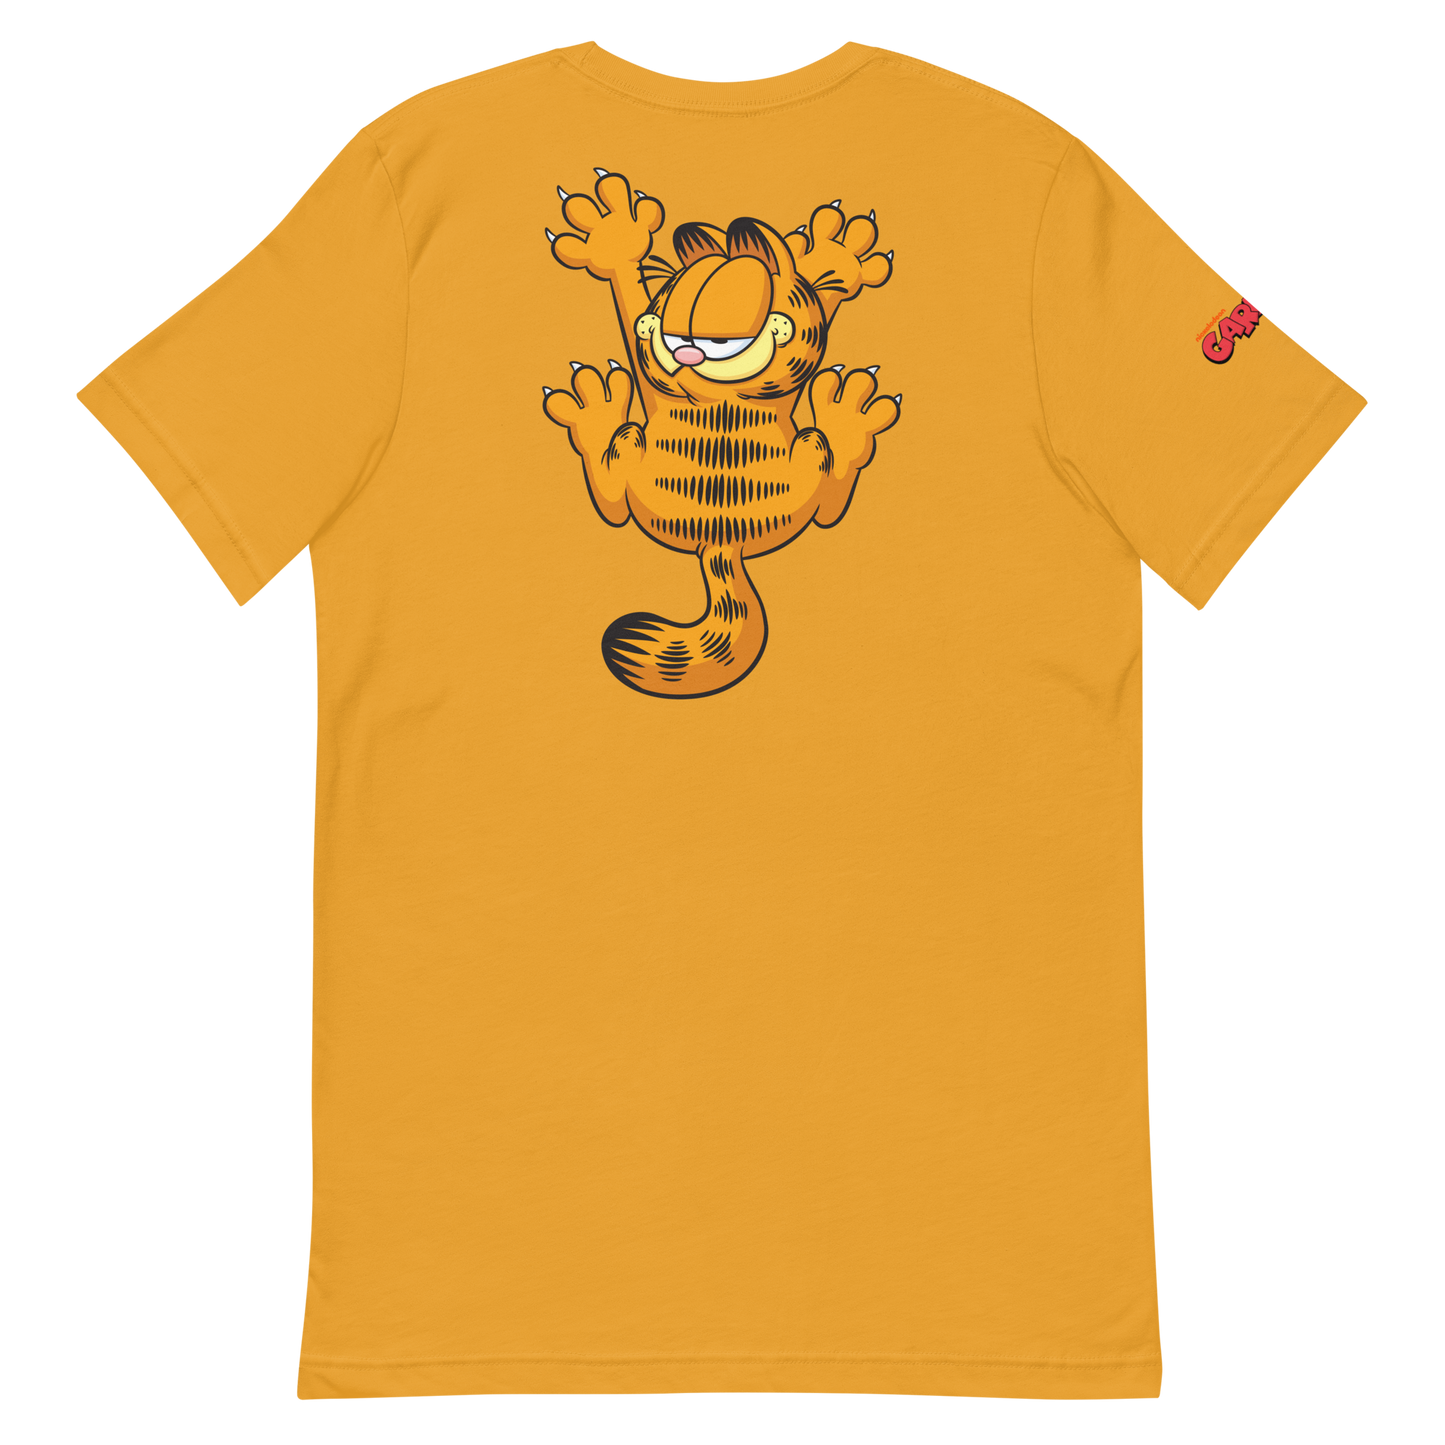 Garfield One Of Those Days Adult Short Sleeve T-Shirt